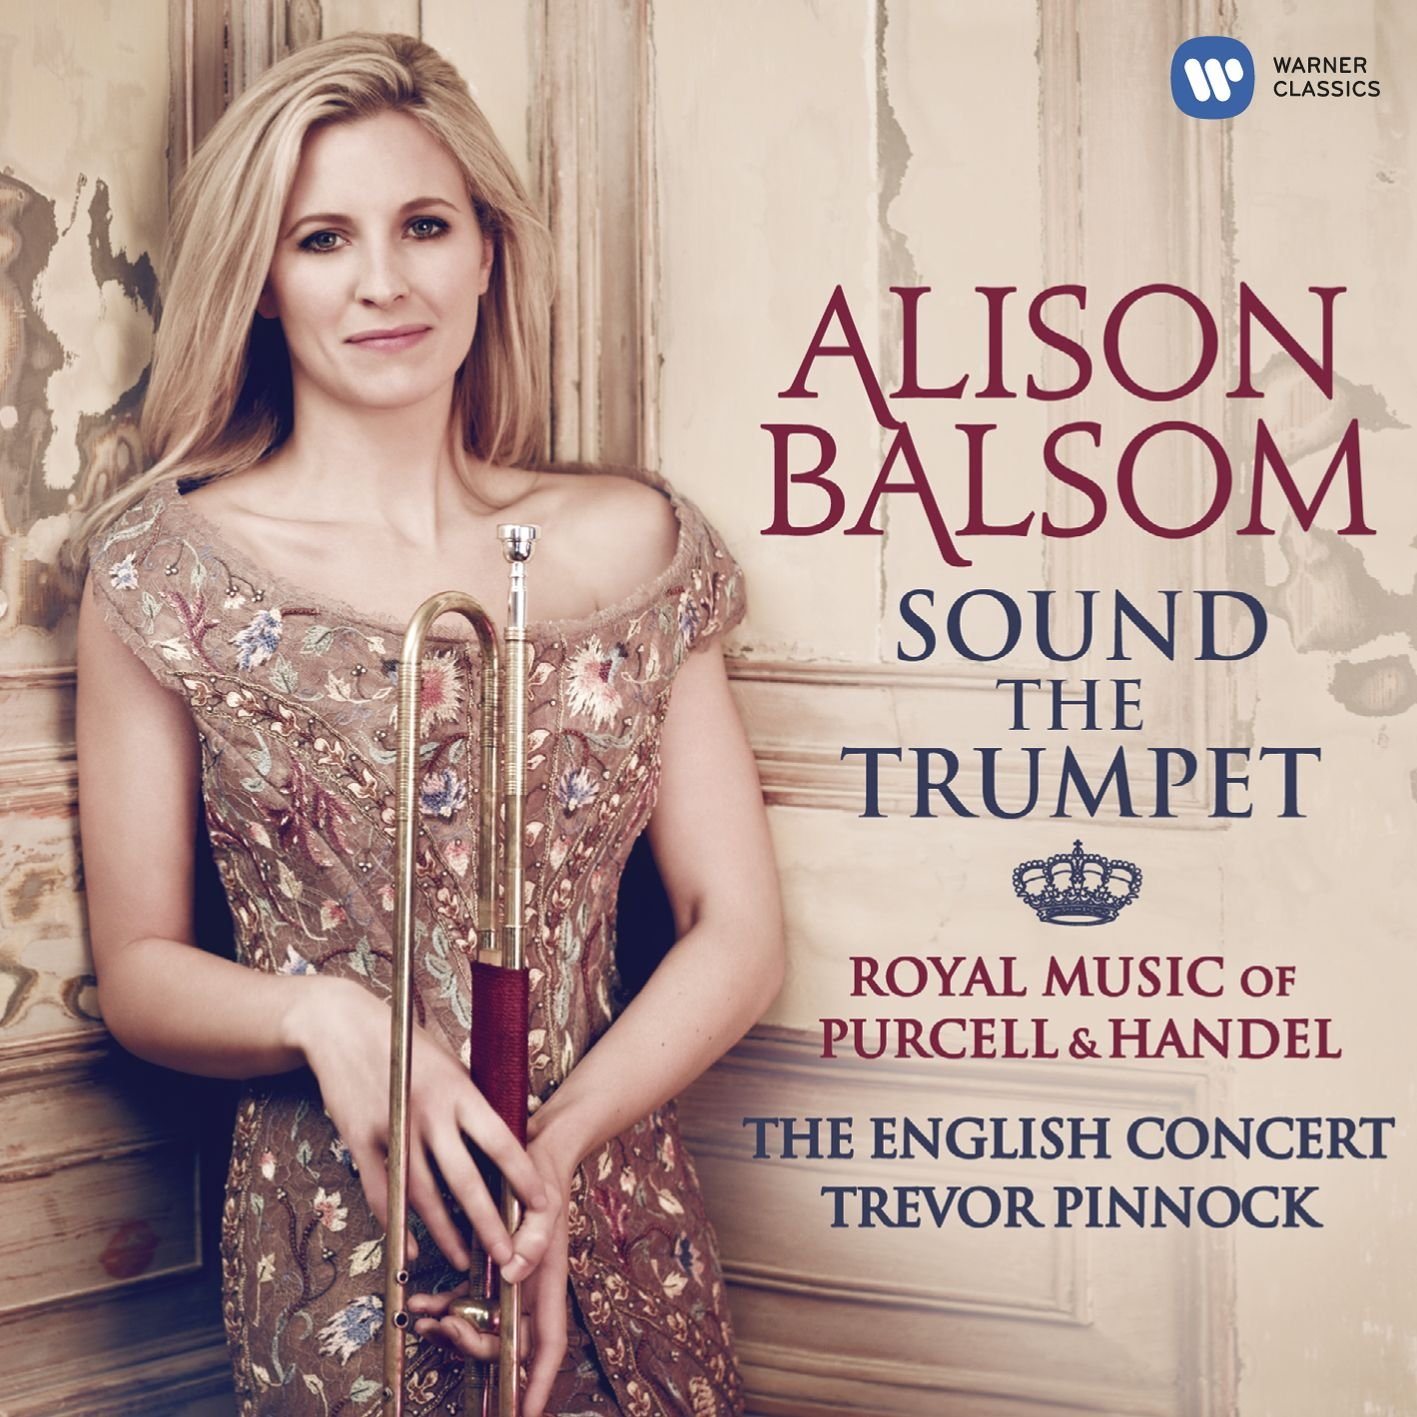 Alison Balsom - Sound the Trumpet (Royal Music of Purcell & Handel)